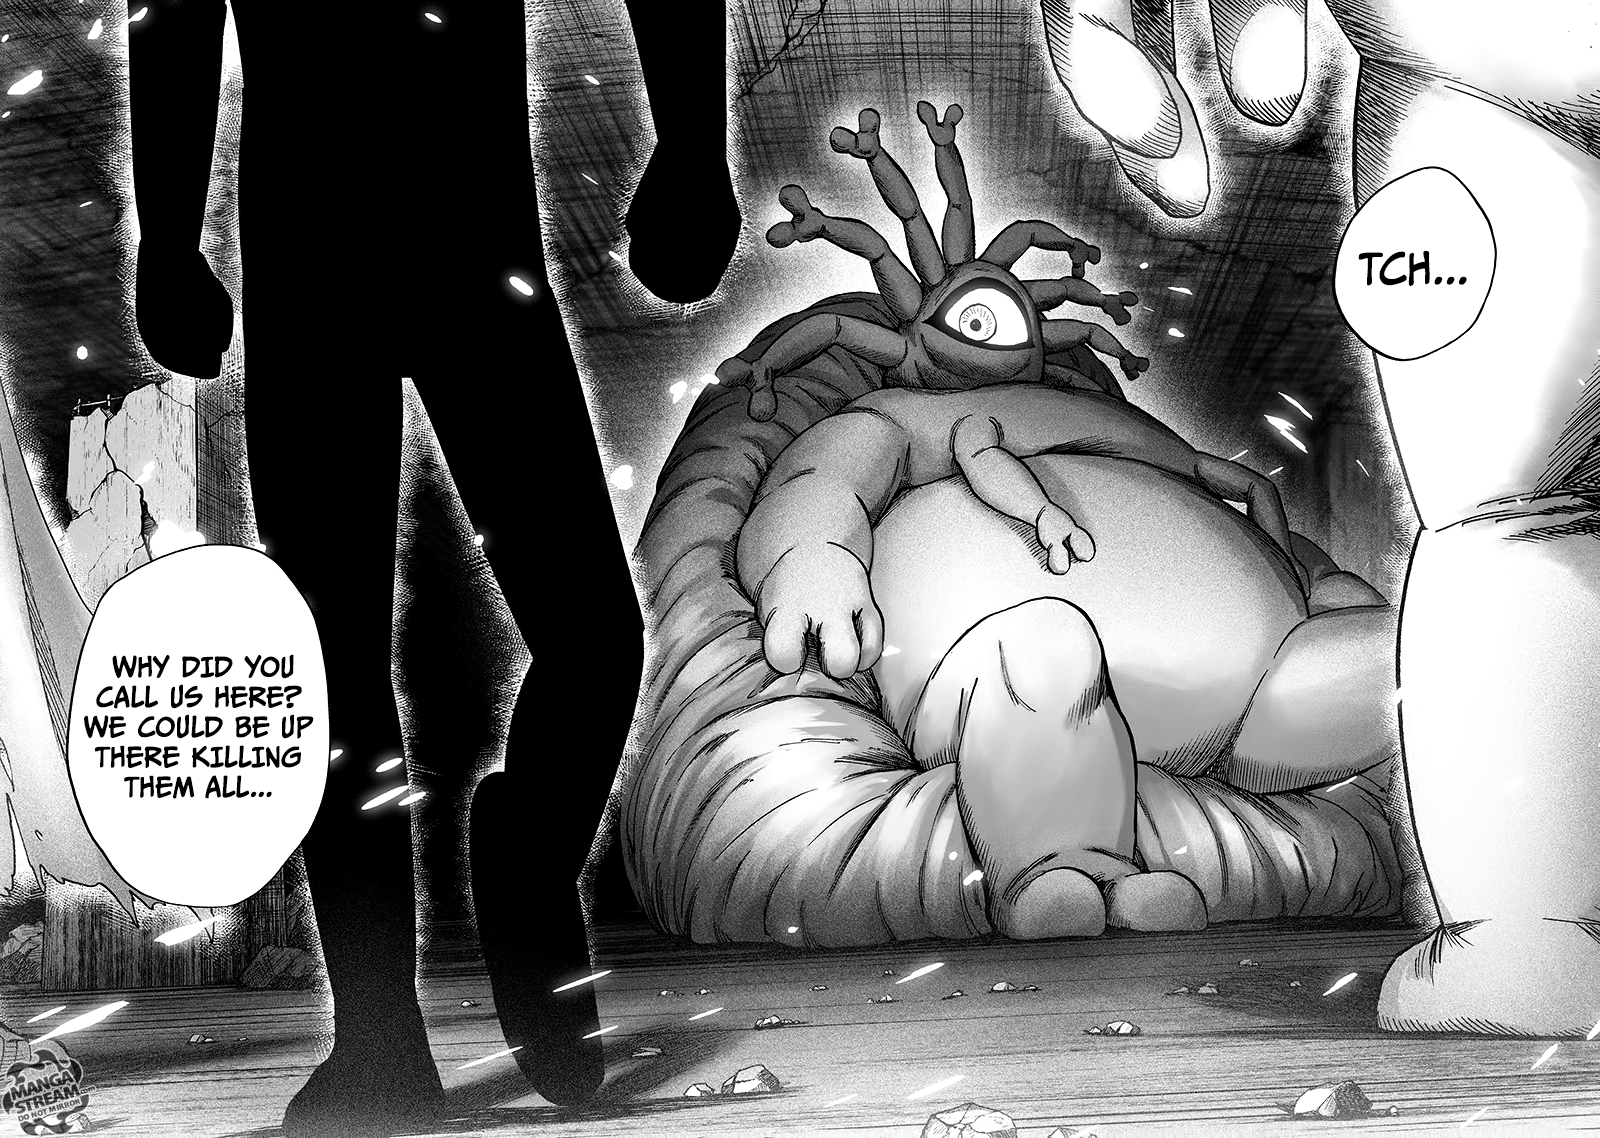 One Punch Man, Chapter 94 - I See image 142